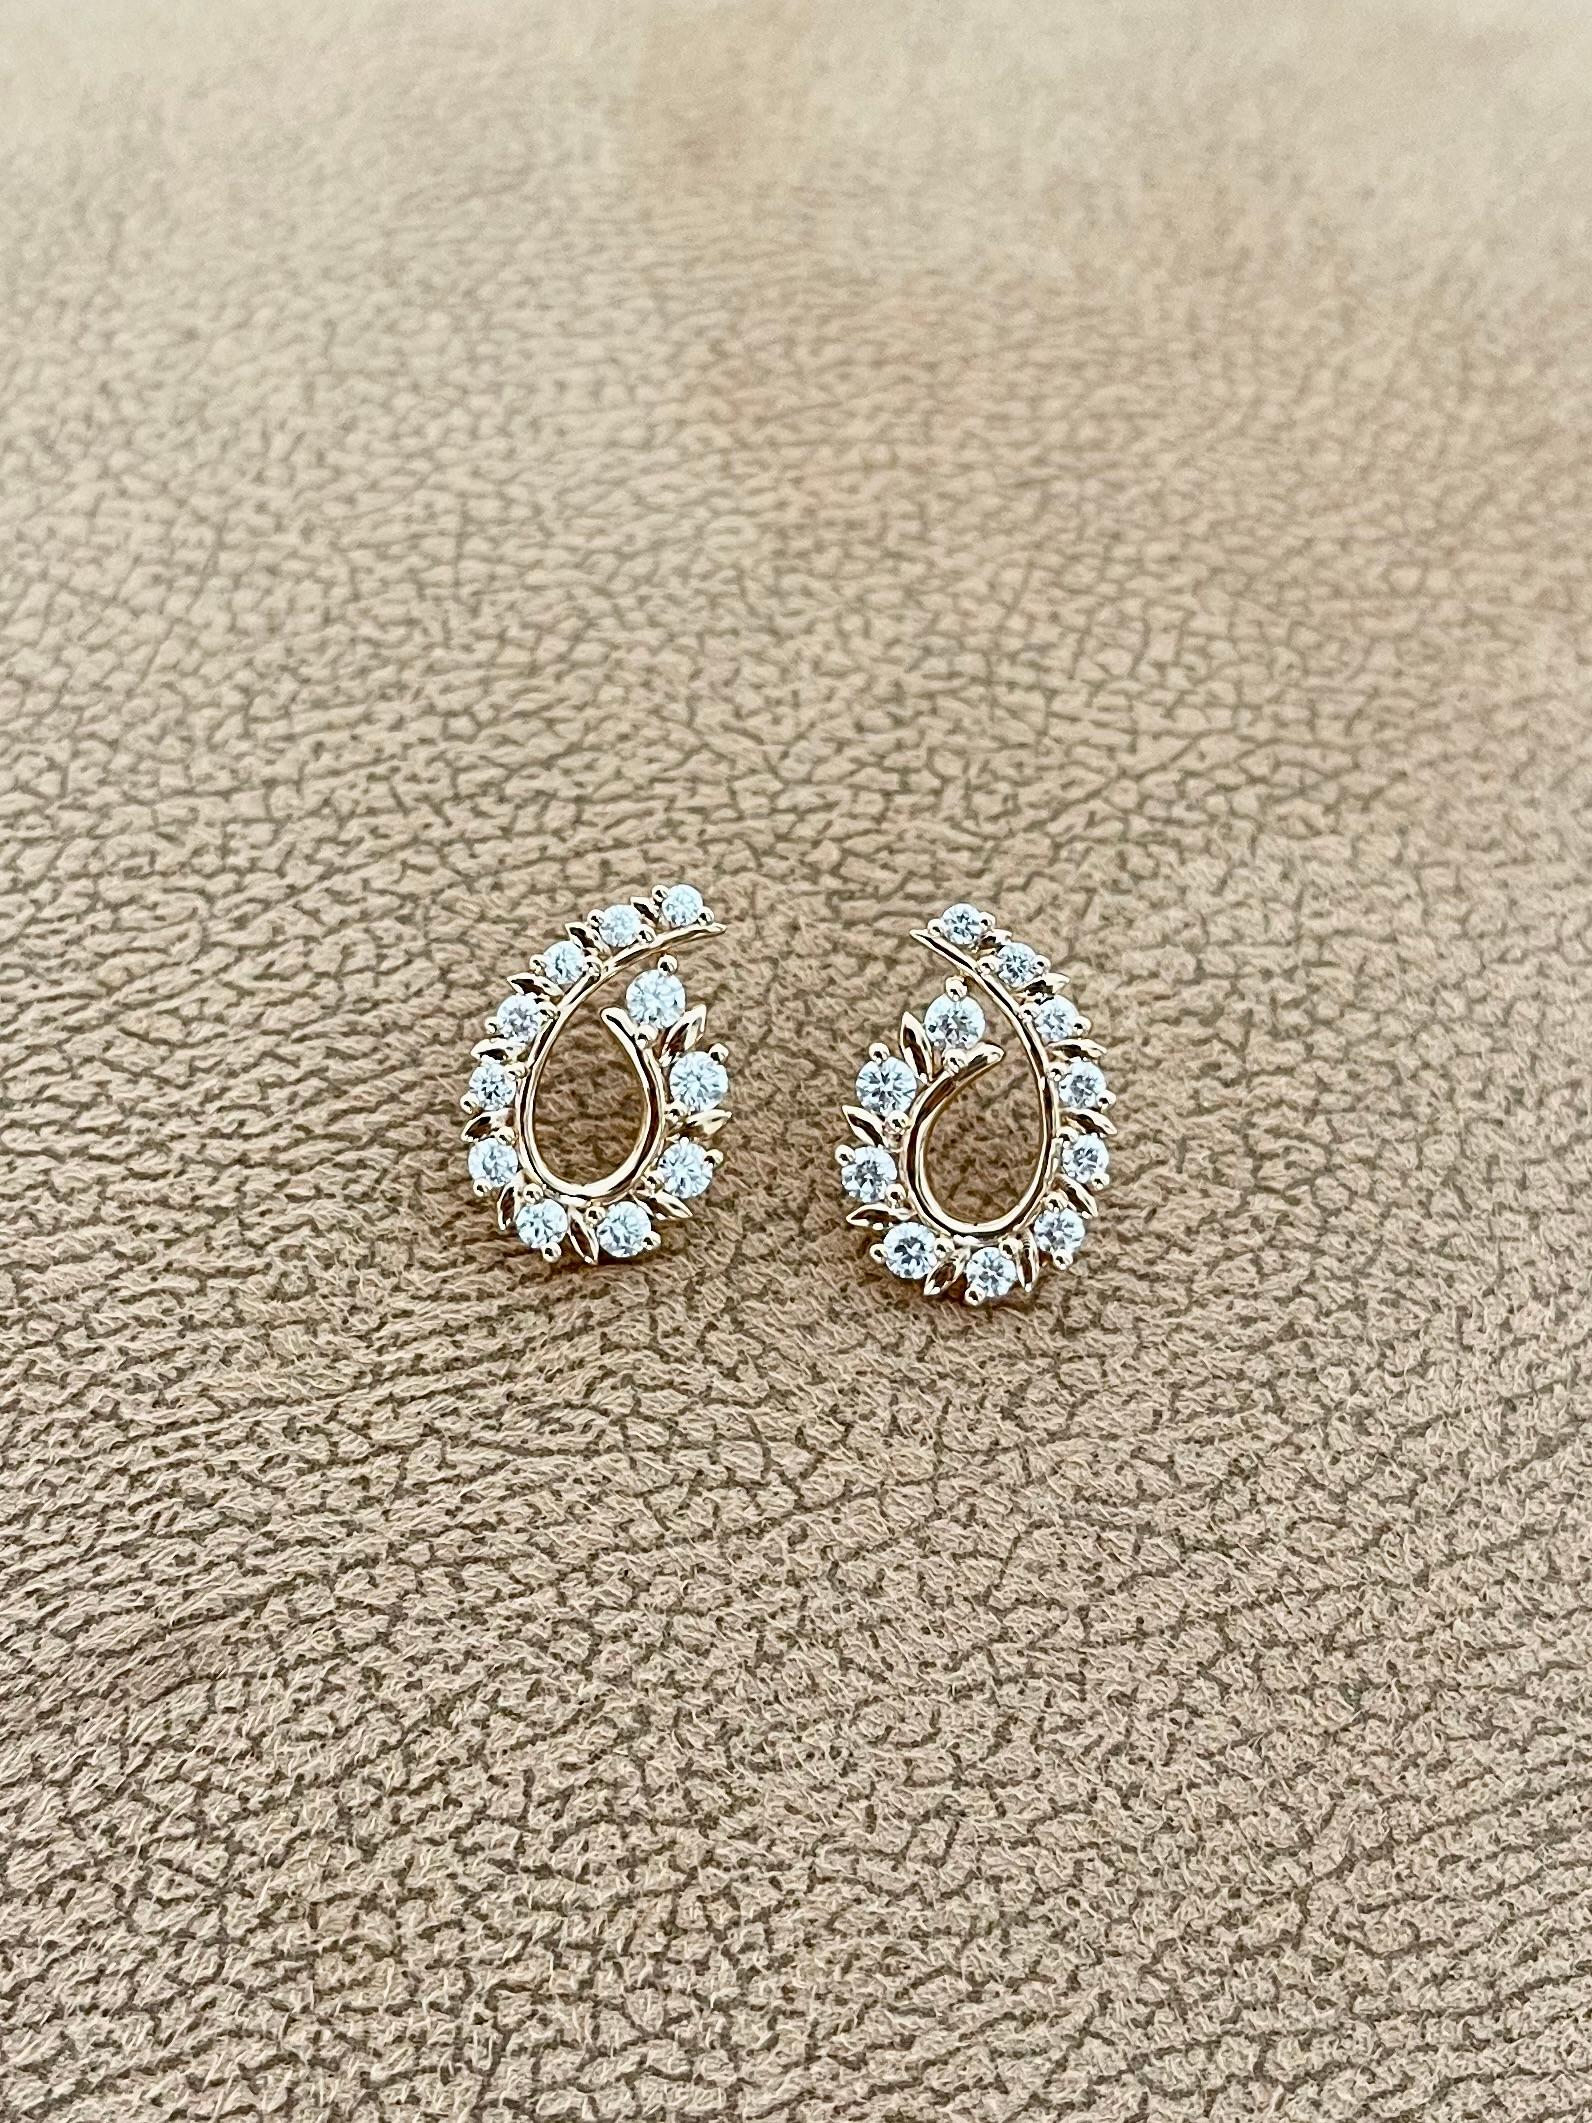 These captivating diamond earrings boast a dazzling 1.45 total carat weight of round brilliant diamonds, set in luxurious 18K rose gold. The soft, feminine blush of the rose gold beautifully complements the sparkling diamonds, creating a look that